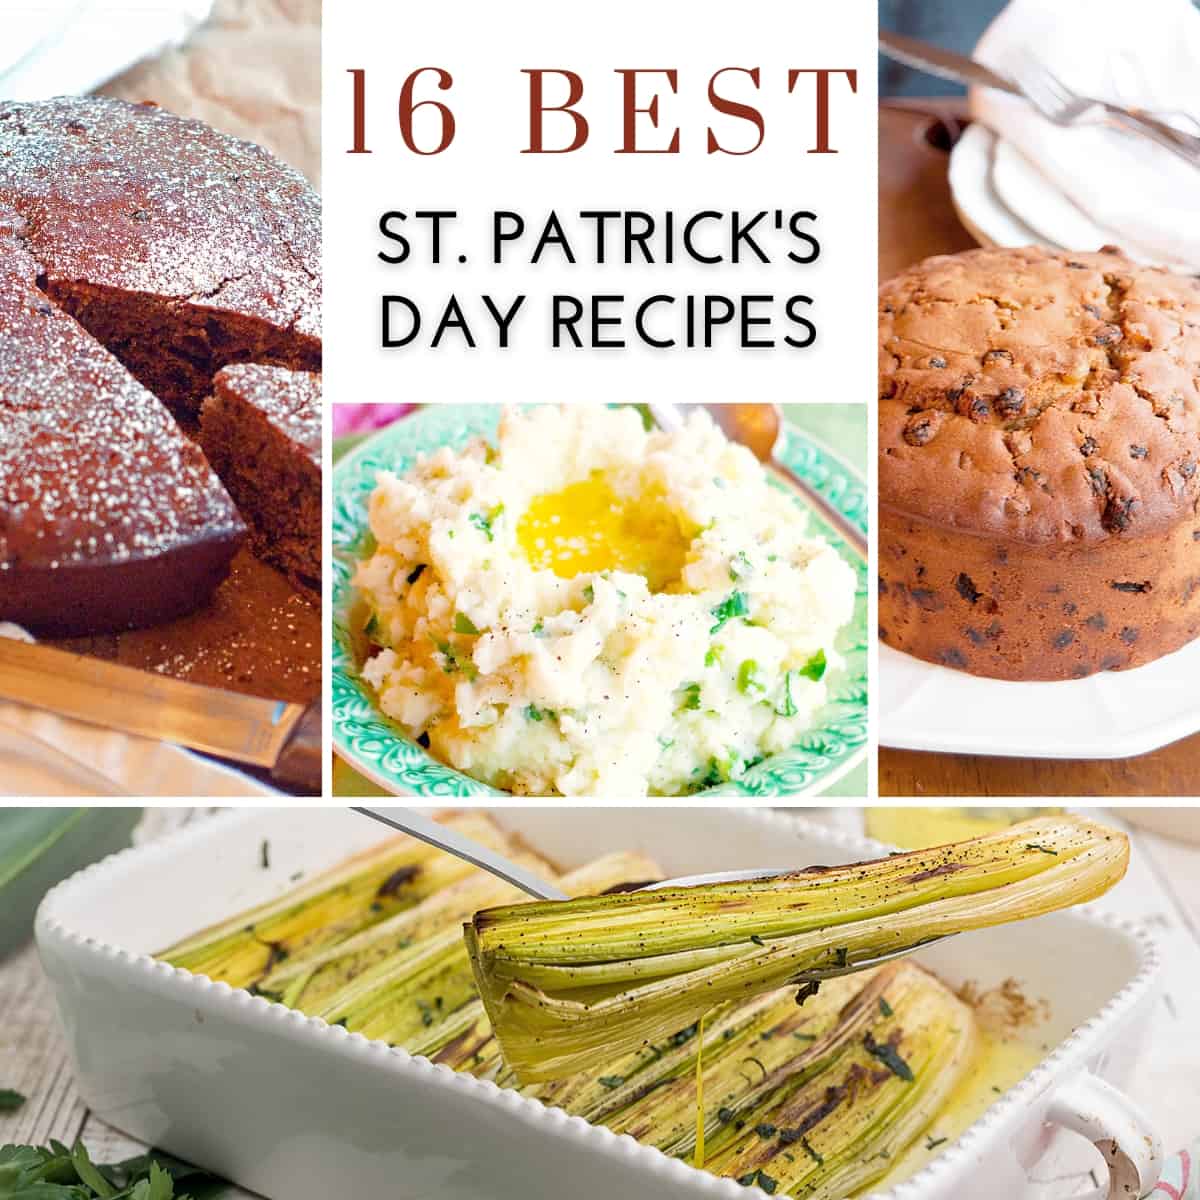 16 Best St. Patrick’s Day Recipes